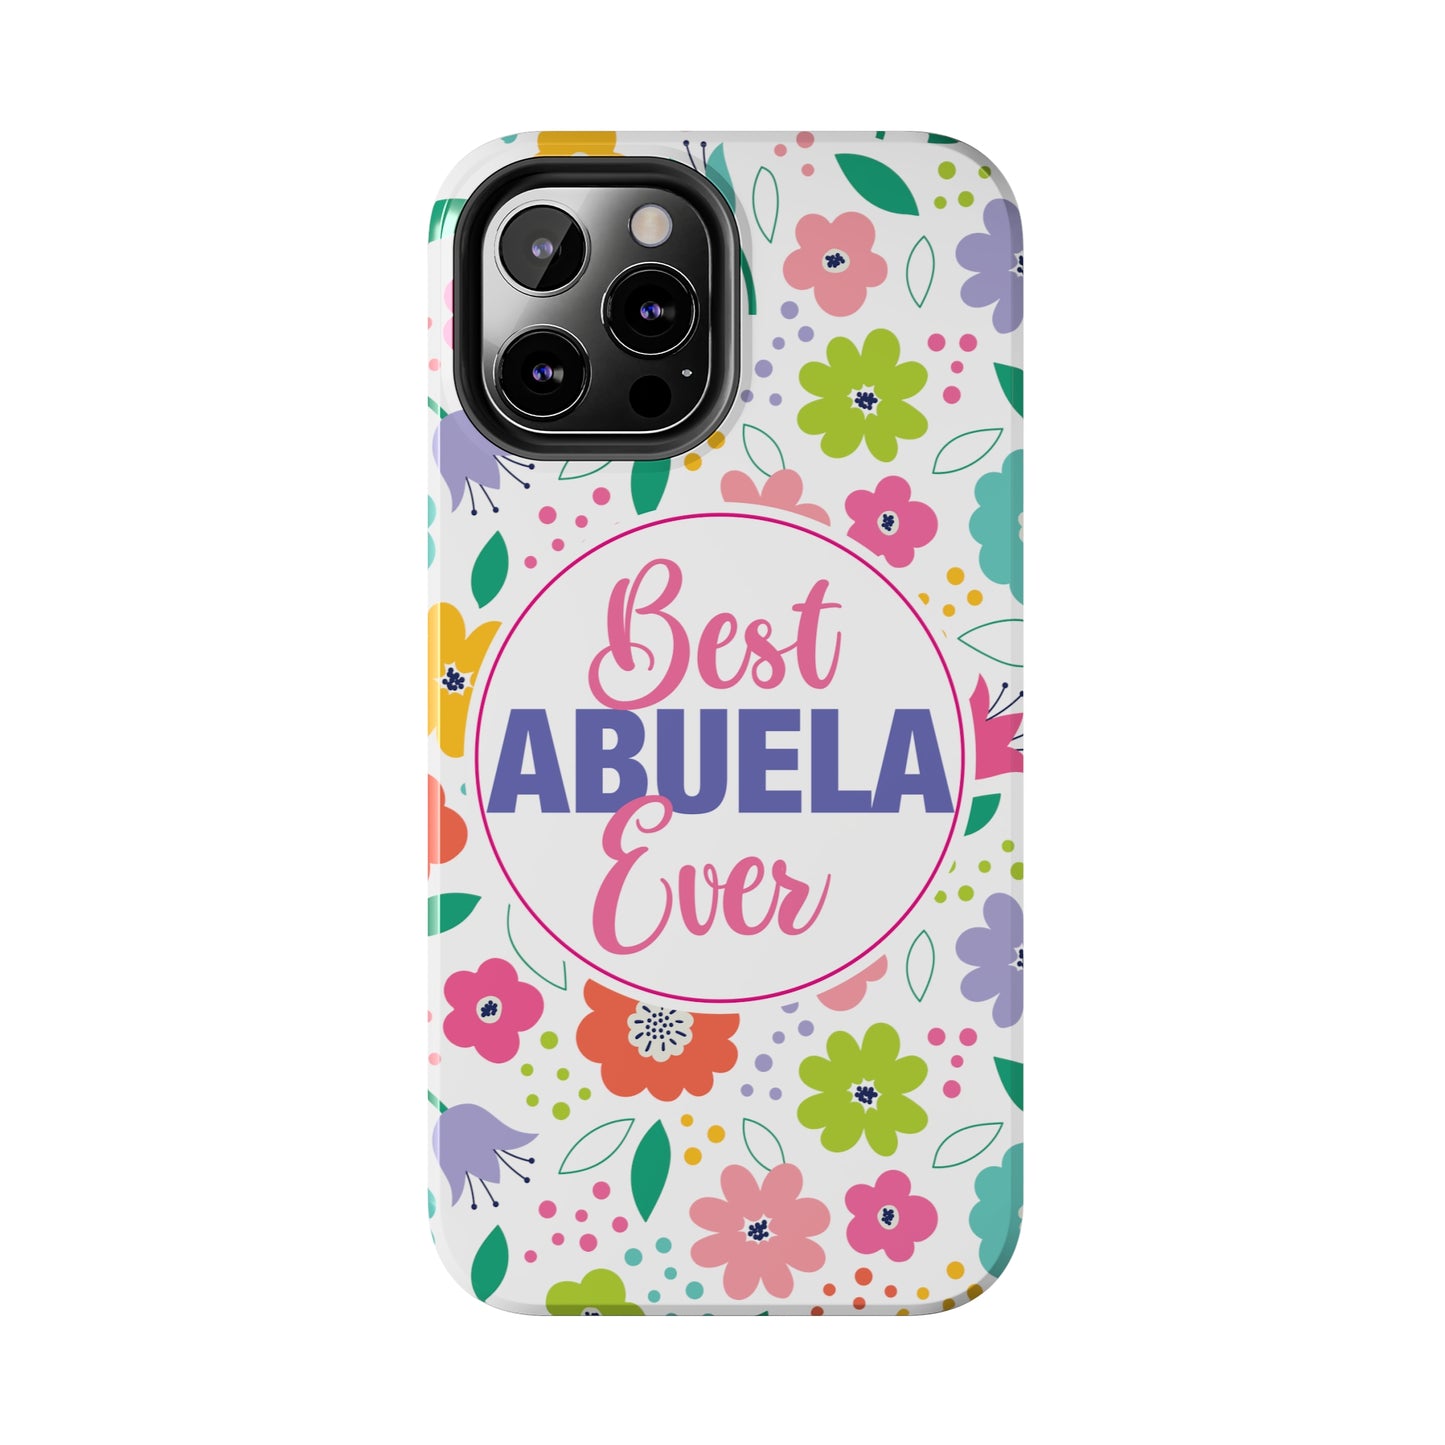 Best Abuela Ever Tough Phone Cases, Case-Mate, Mothers Day Gift